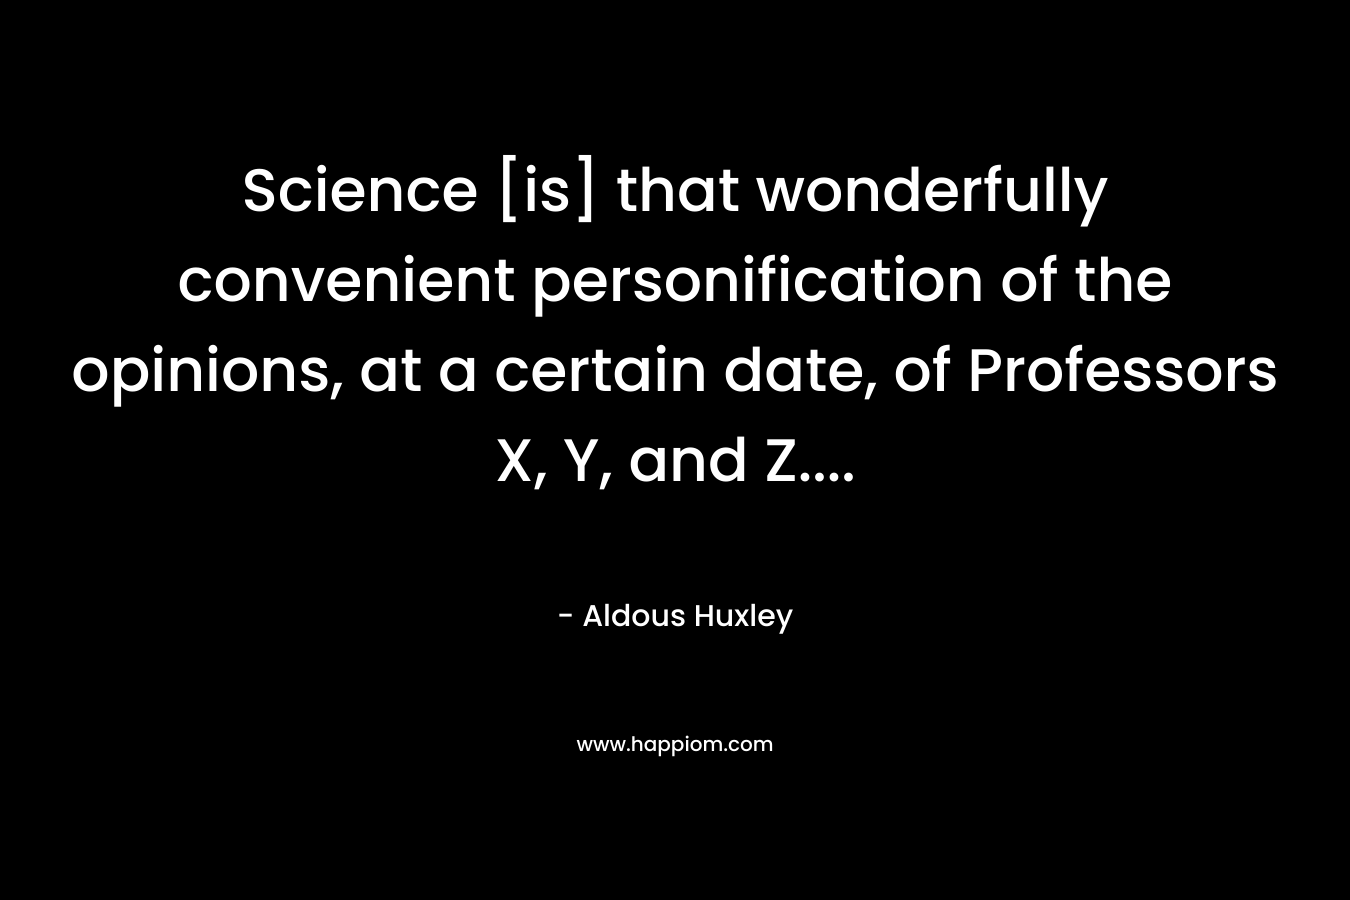 Science [is] that wonderfully convenient personification of the opinions, at a certain date, of Professors X, Y, and Z…. – Aldous Huxley